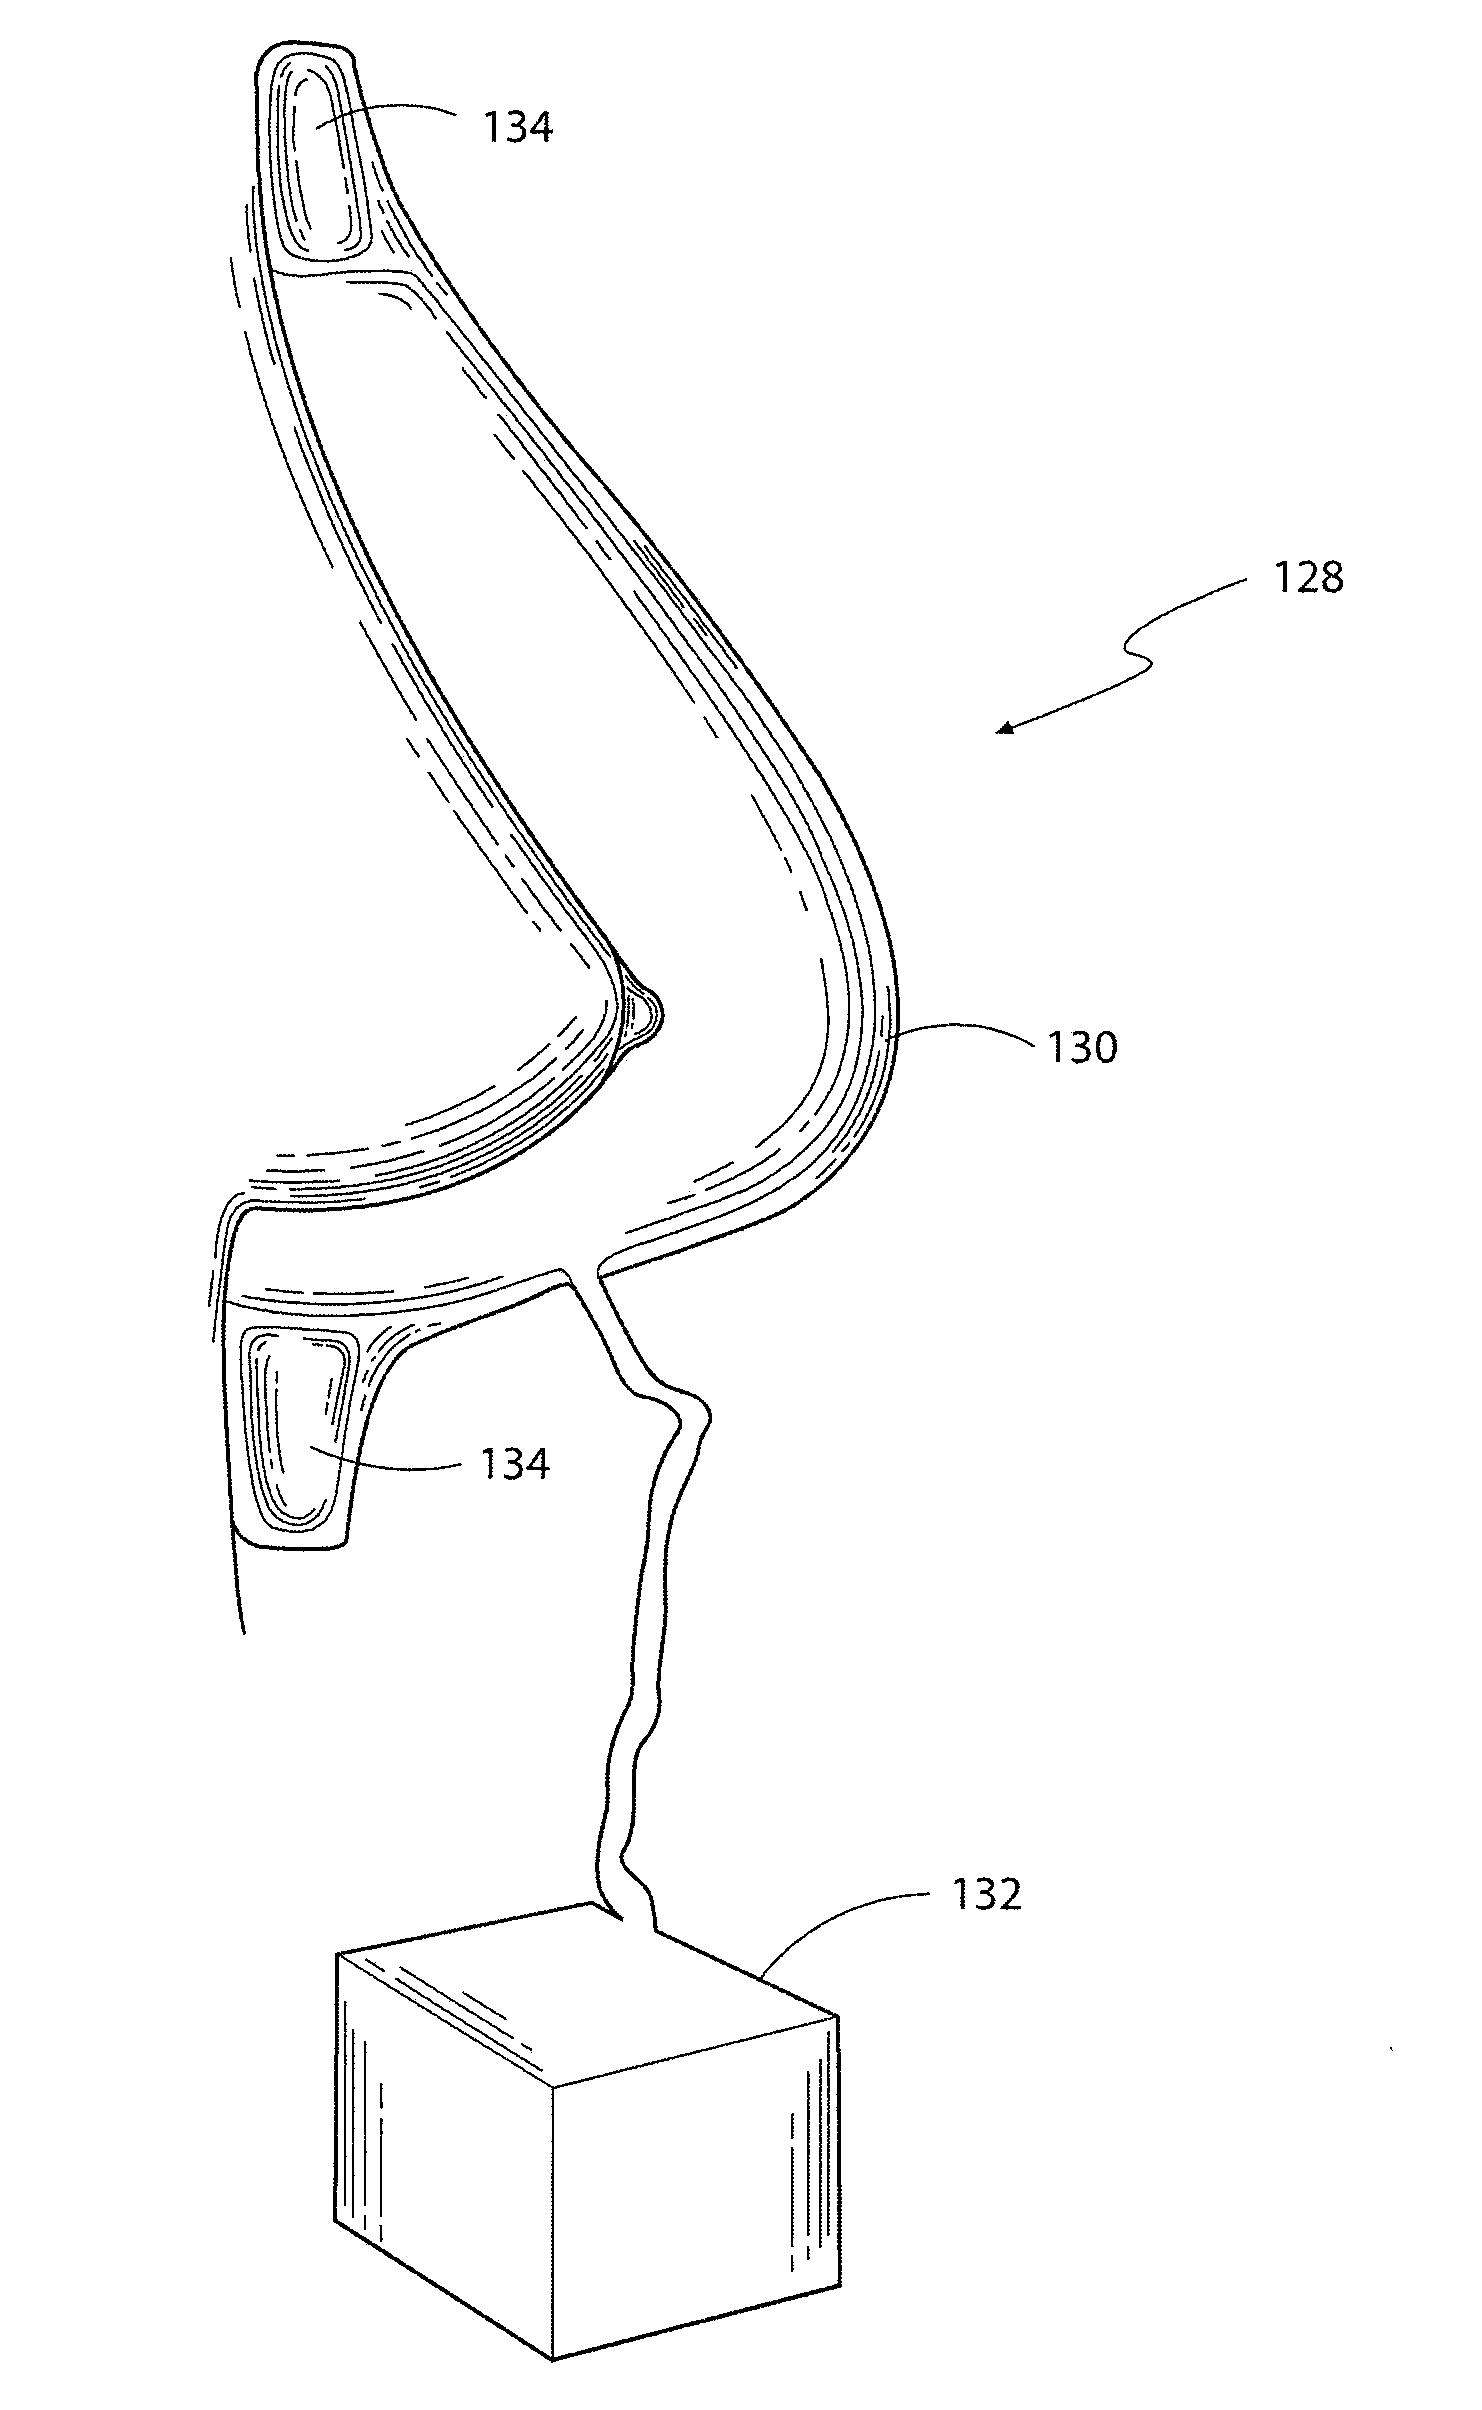 Method and devices for tissue expansion